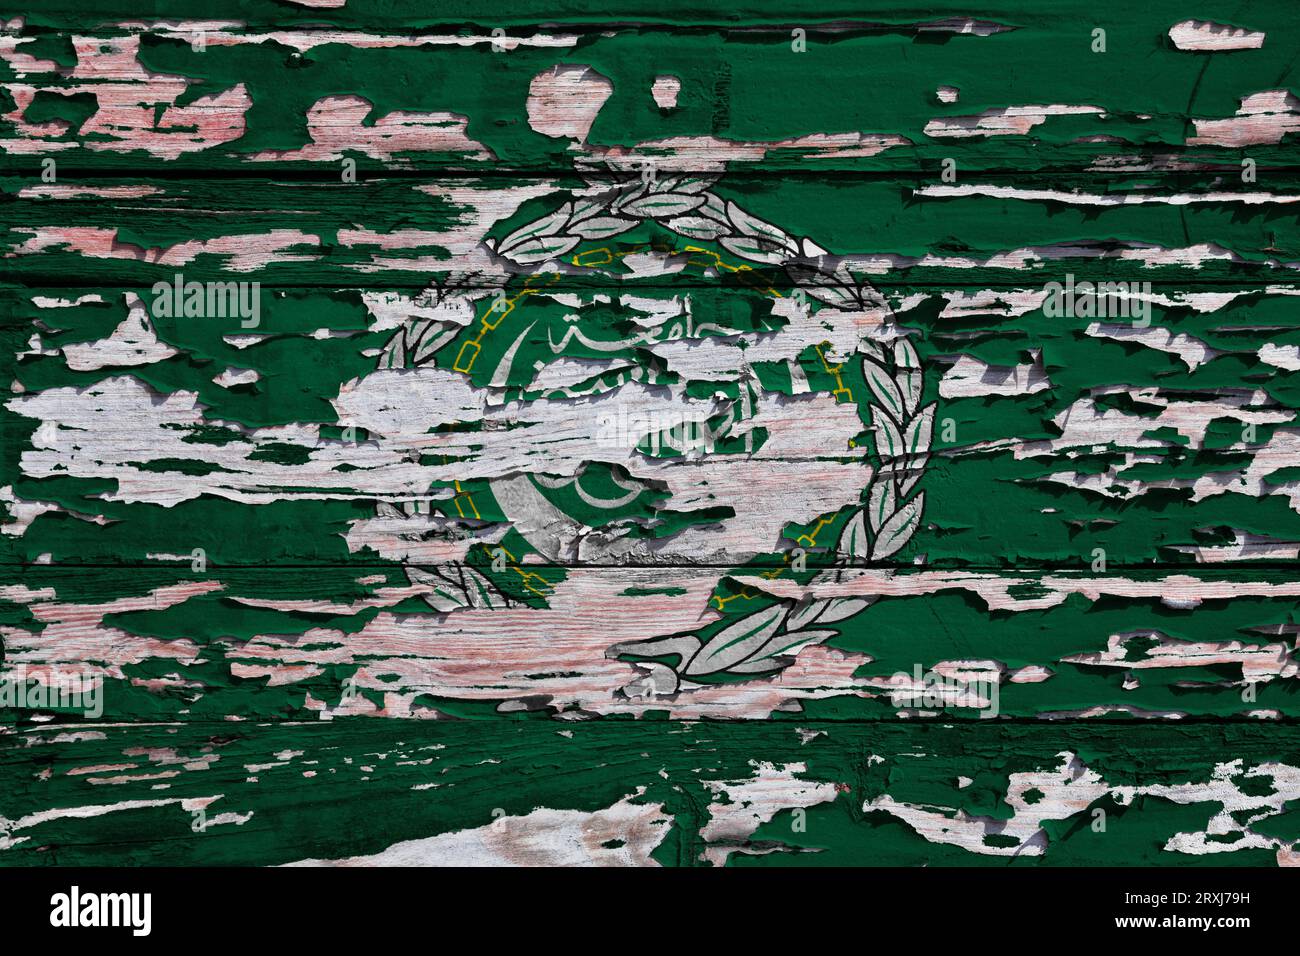 Flag of Arab League painted on a grunge wooden board. Stock Photo